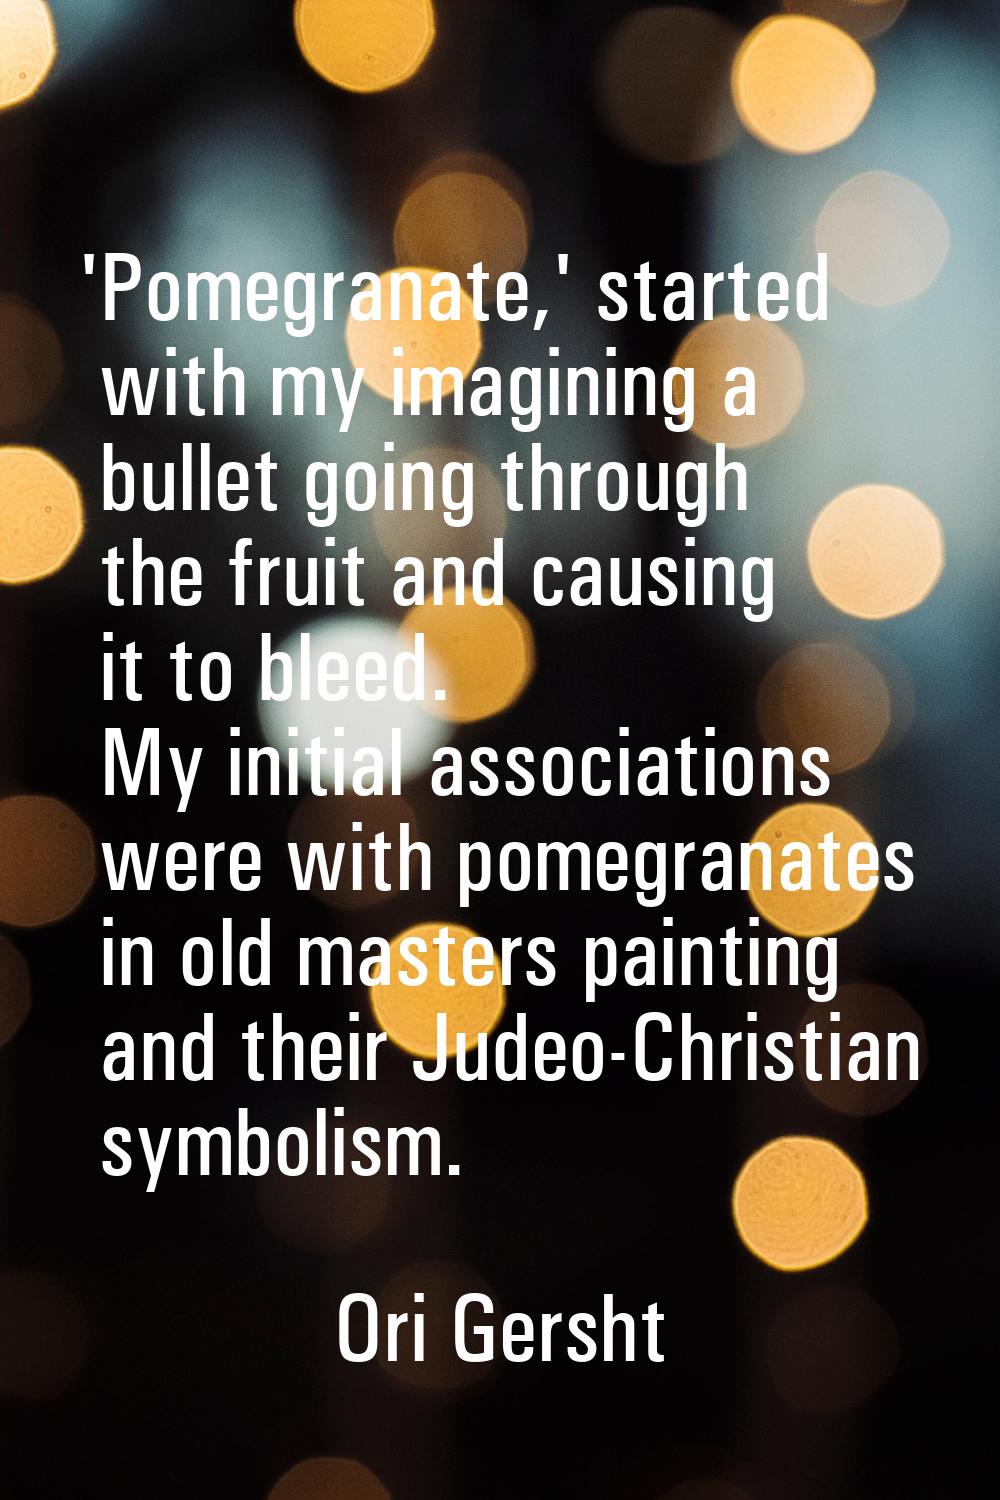 'Pomegranate,' started with my imagining a bullet going through the fruit and causing it to bleed. 